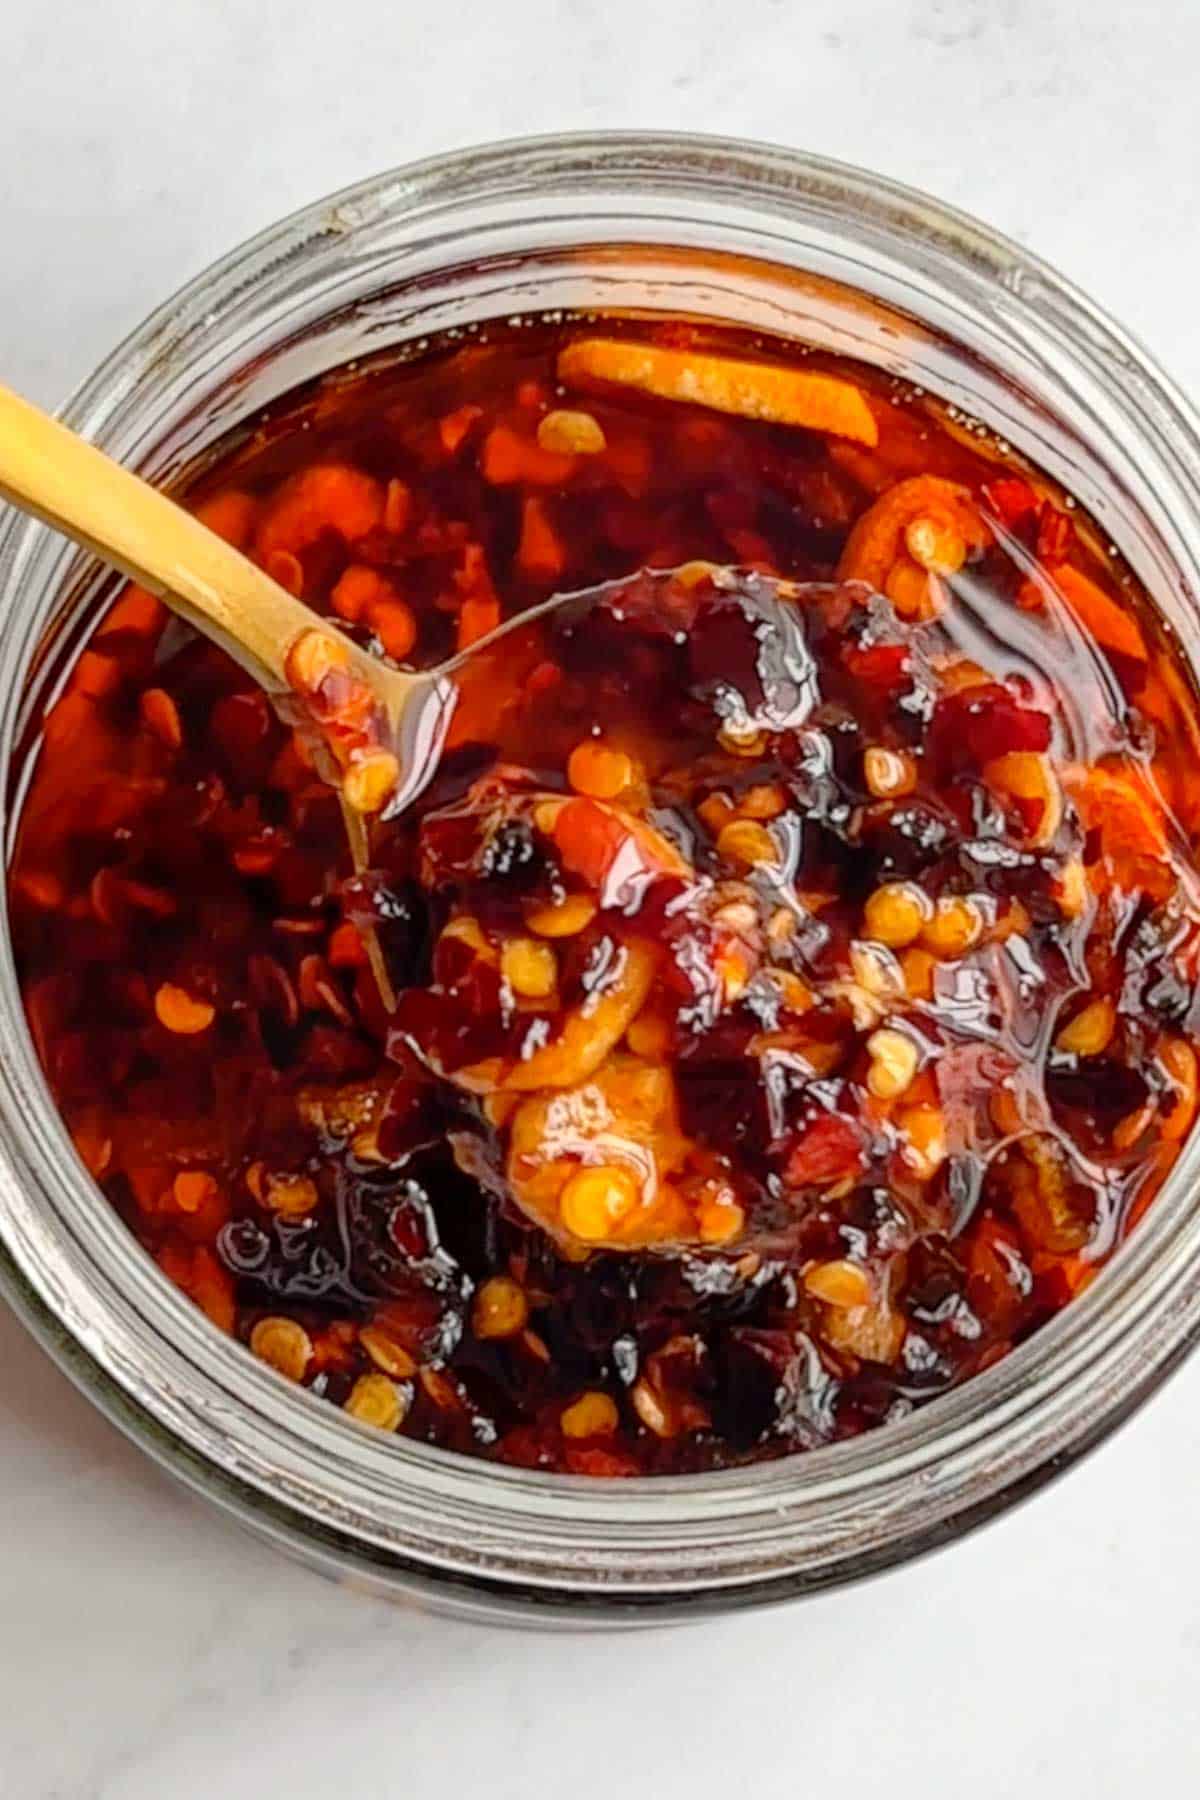 Chili crisp with crushed red pepper, garlic, shallots and oil on a gold spoon in a glass jar.